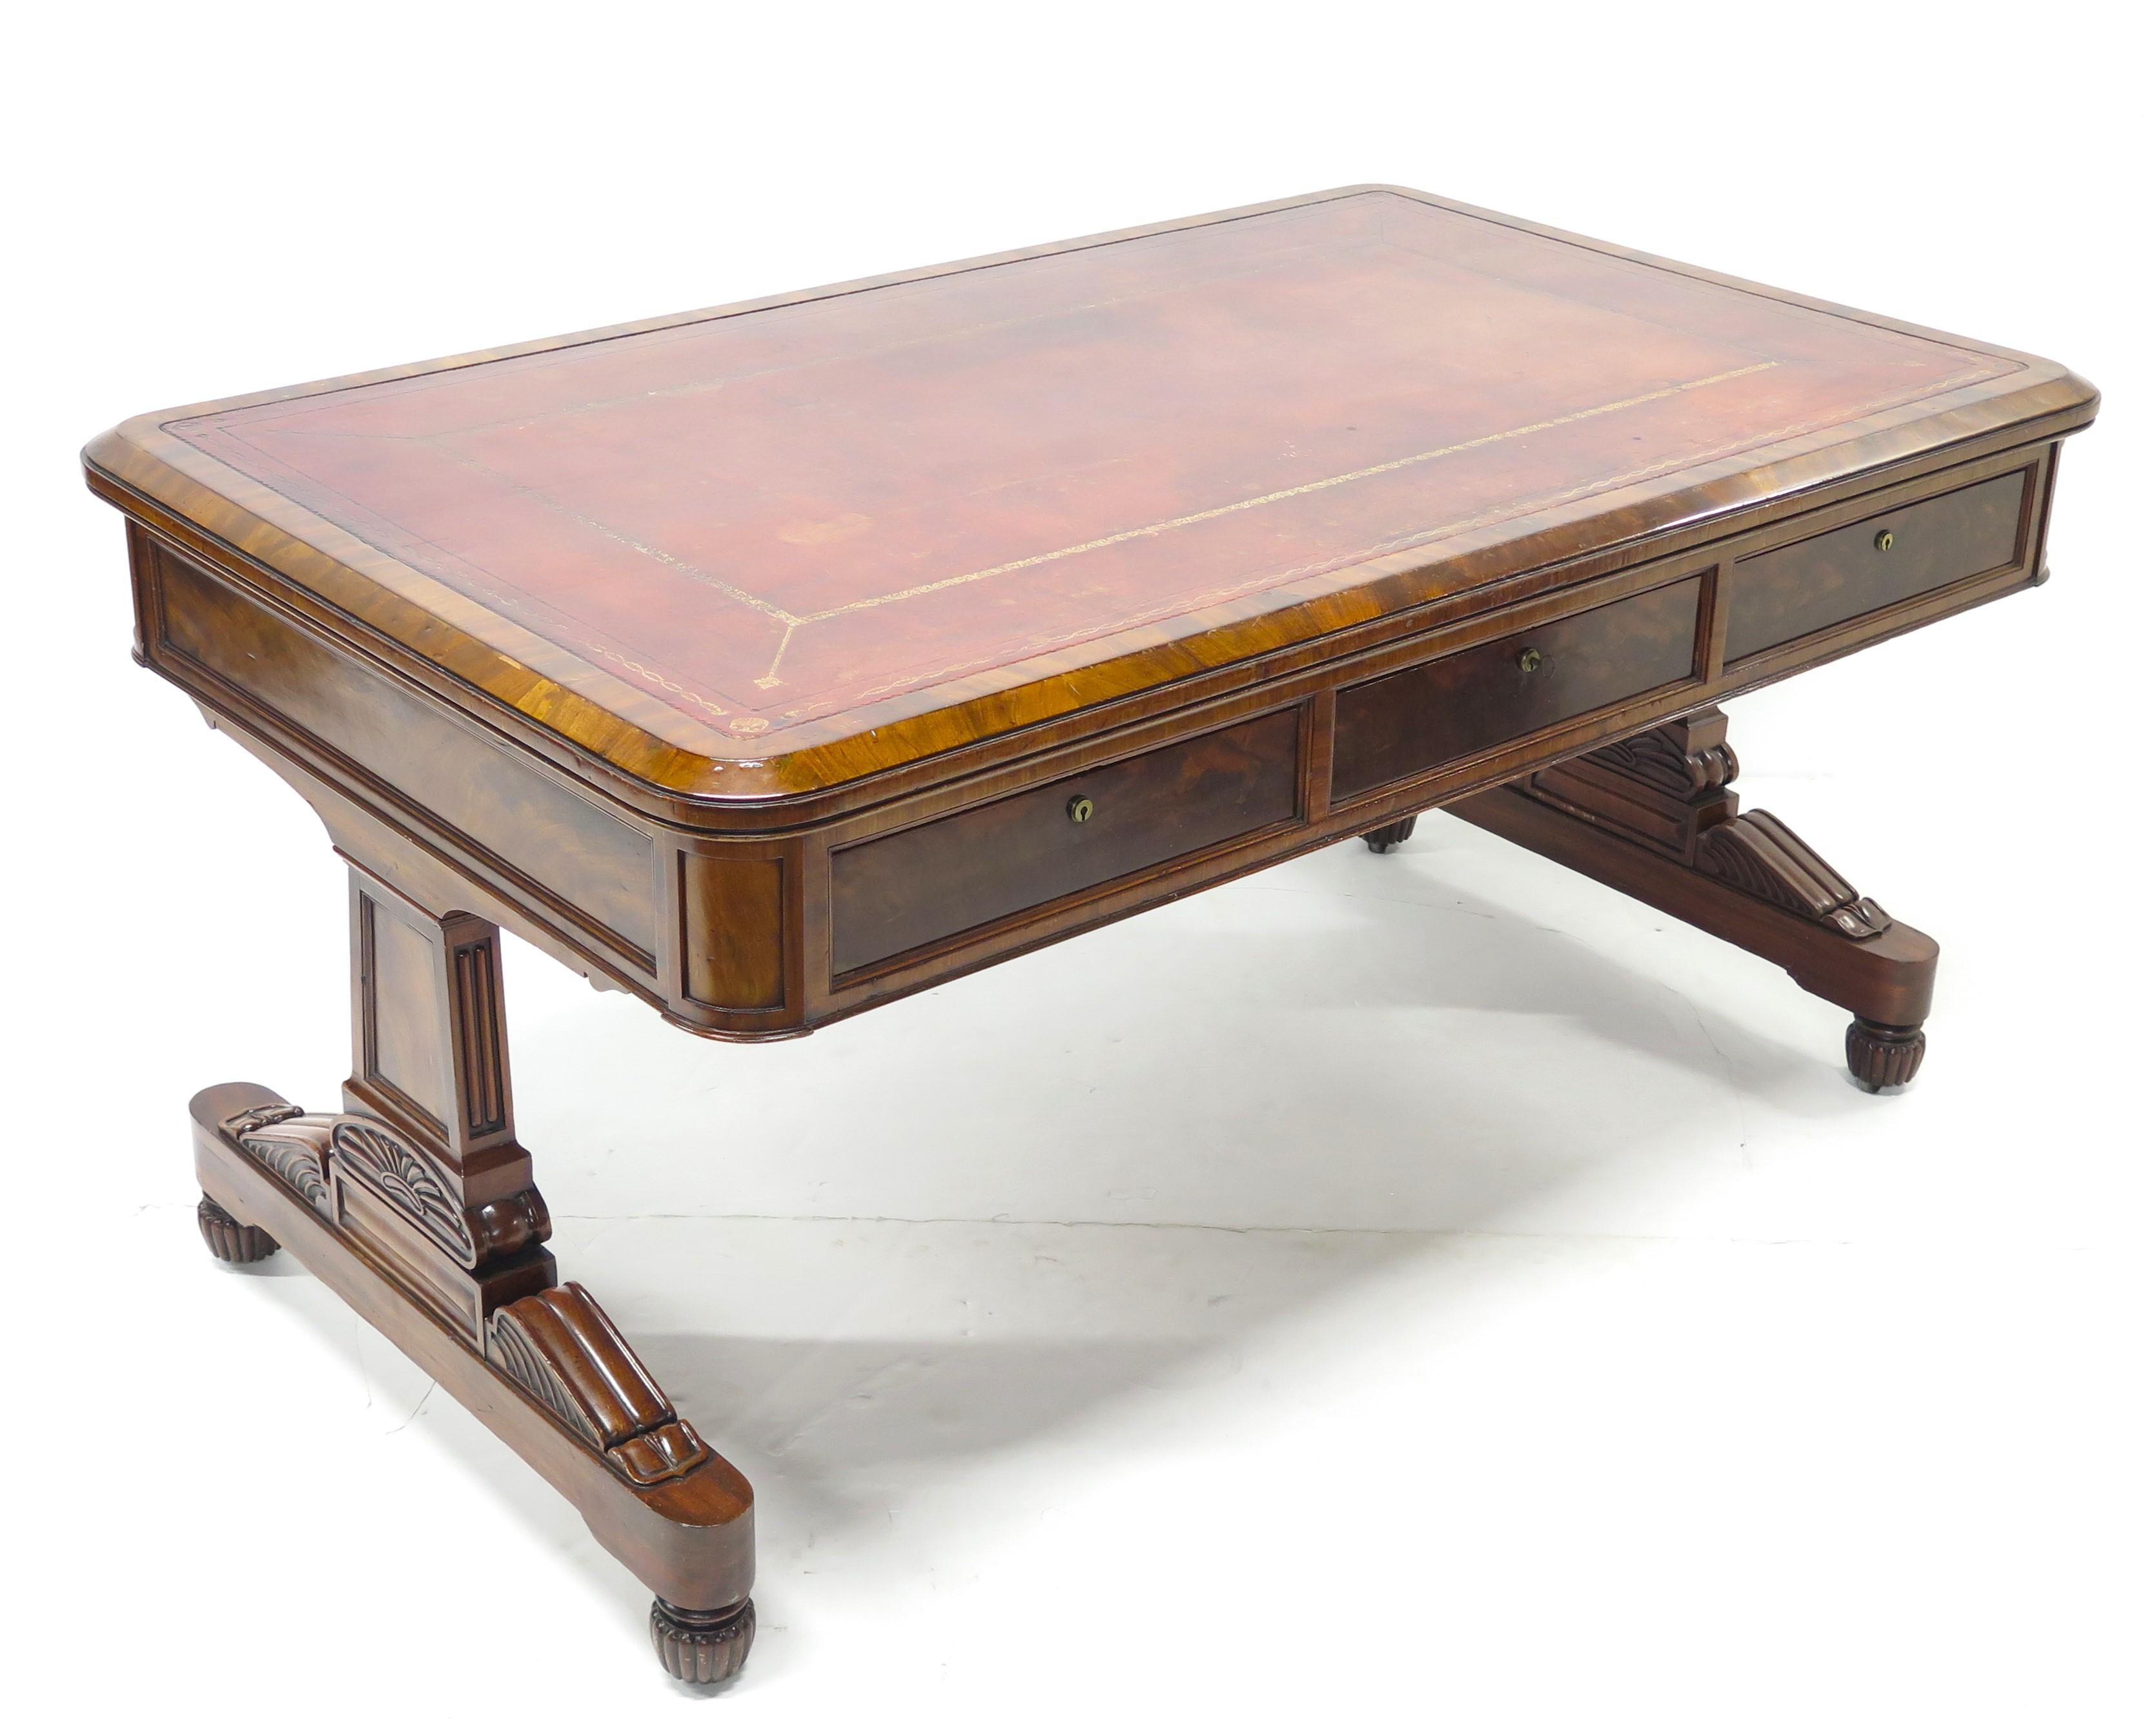 a William IV mahogany partners writing table / desk with gilt tooled faded red leather inset writing surface, paneled inset drawers and sides, trestle supports each side, England, circa 1830